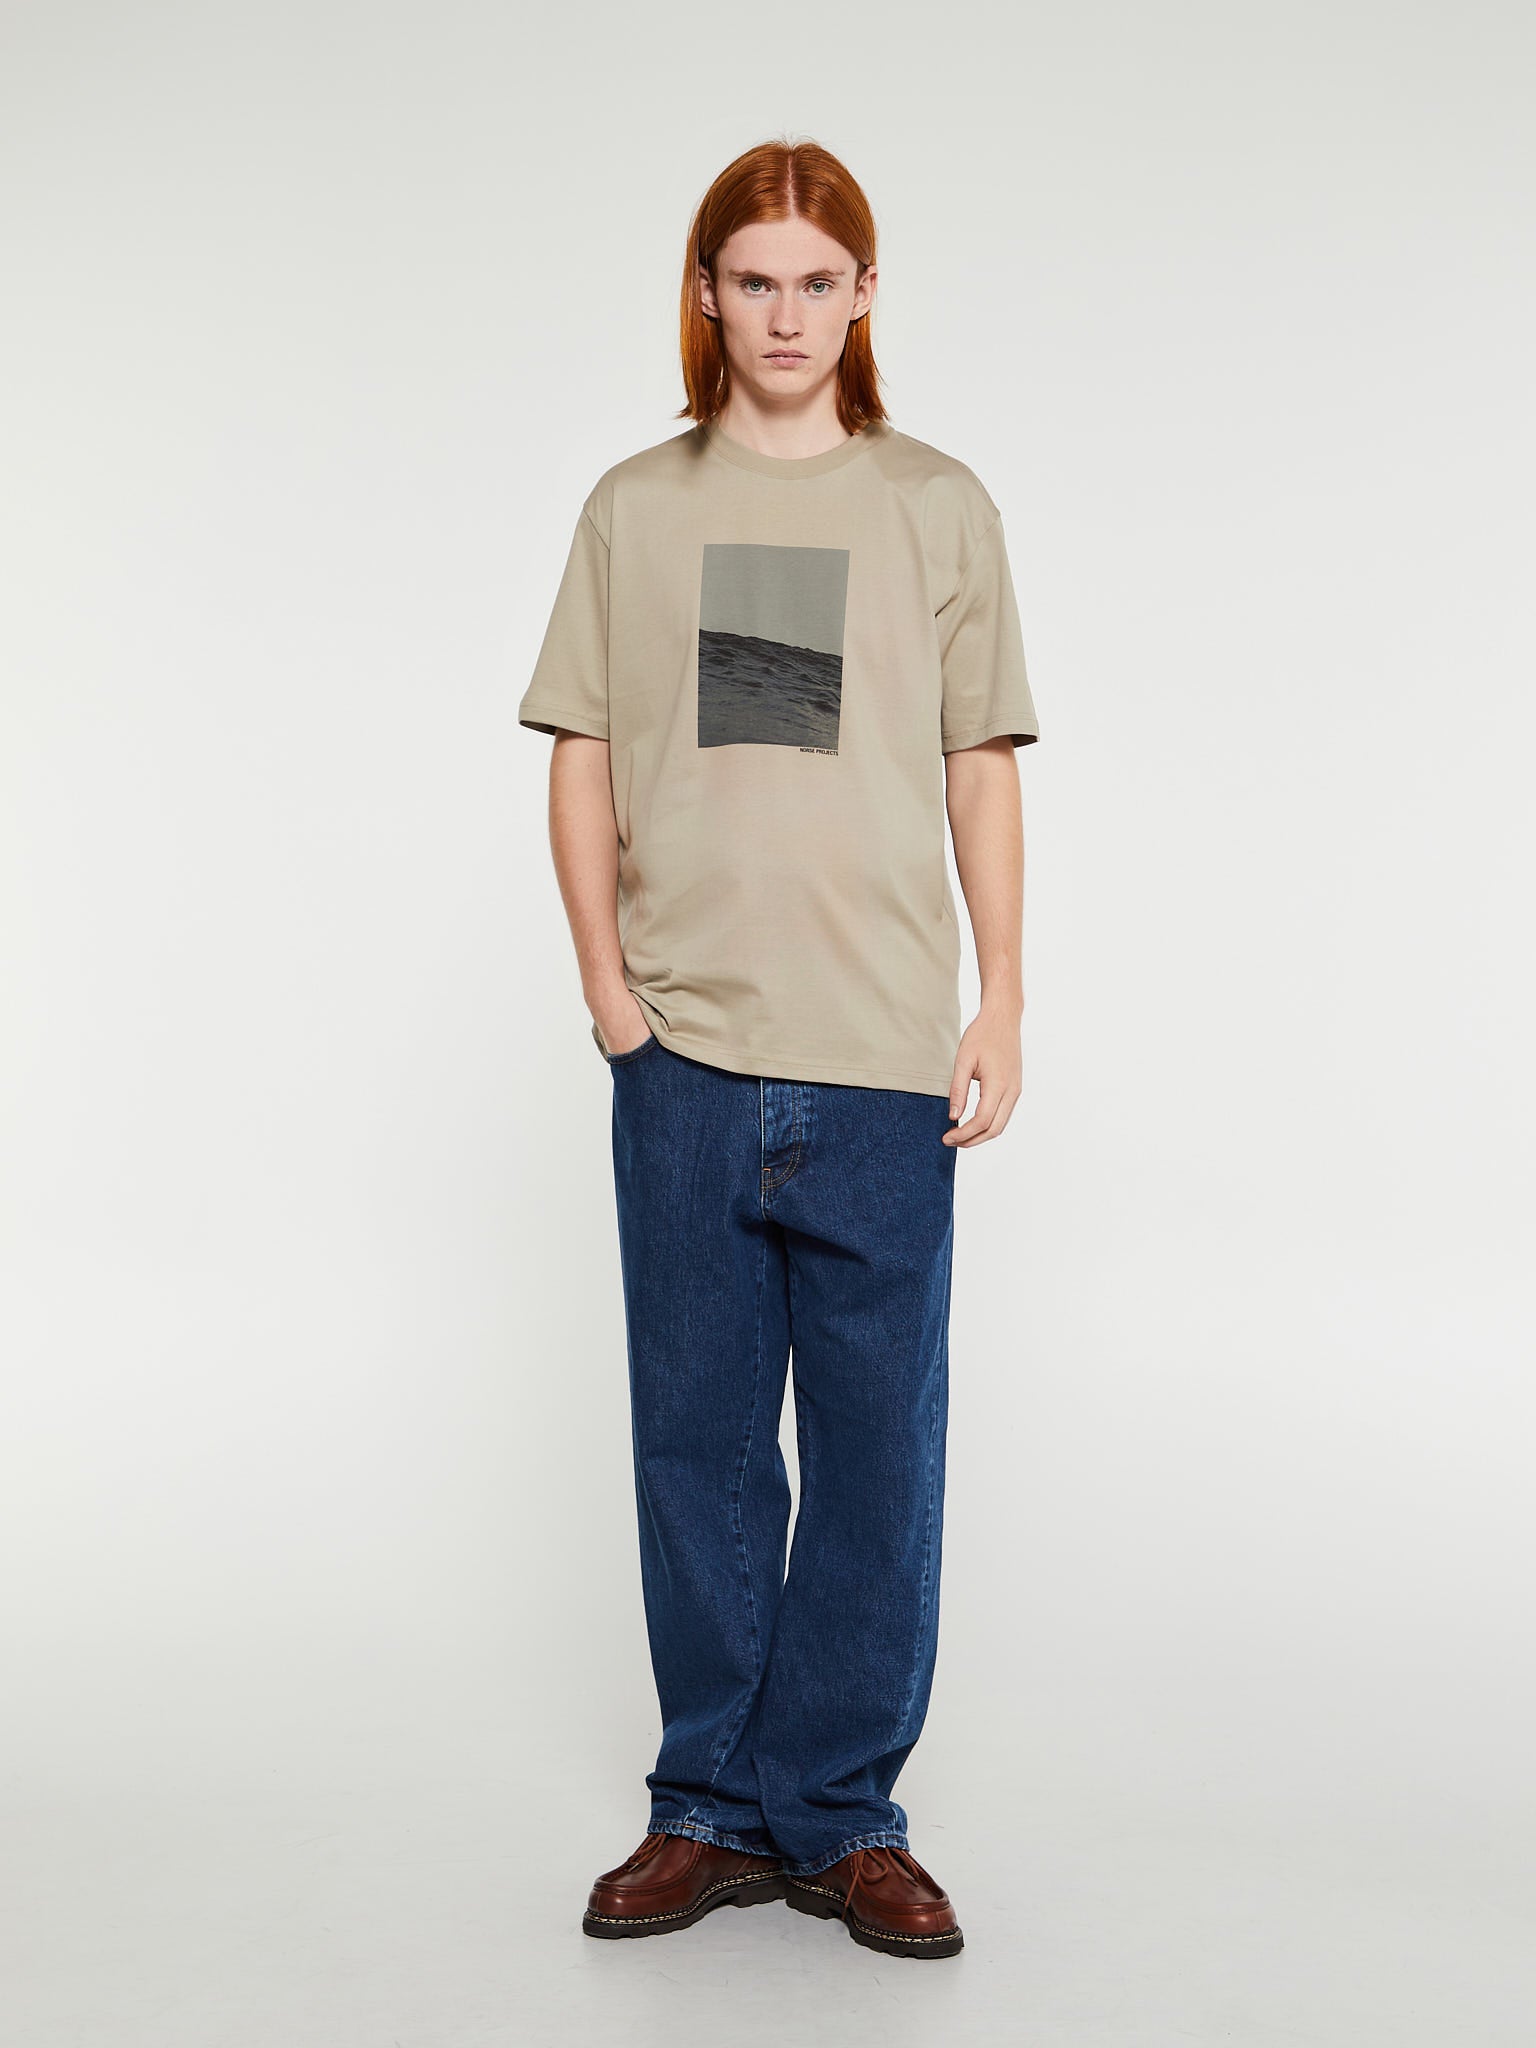 Norse Projects - Johannes Organic Waves Print T-Shirt in Sand